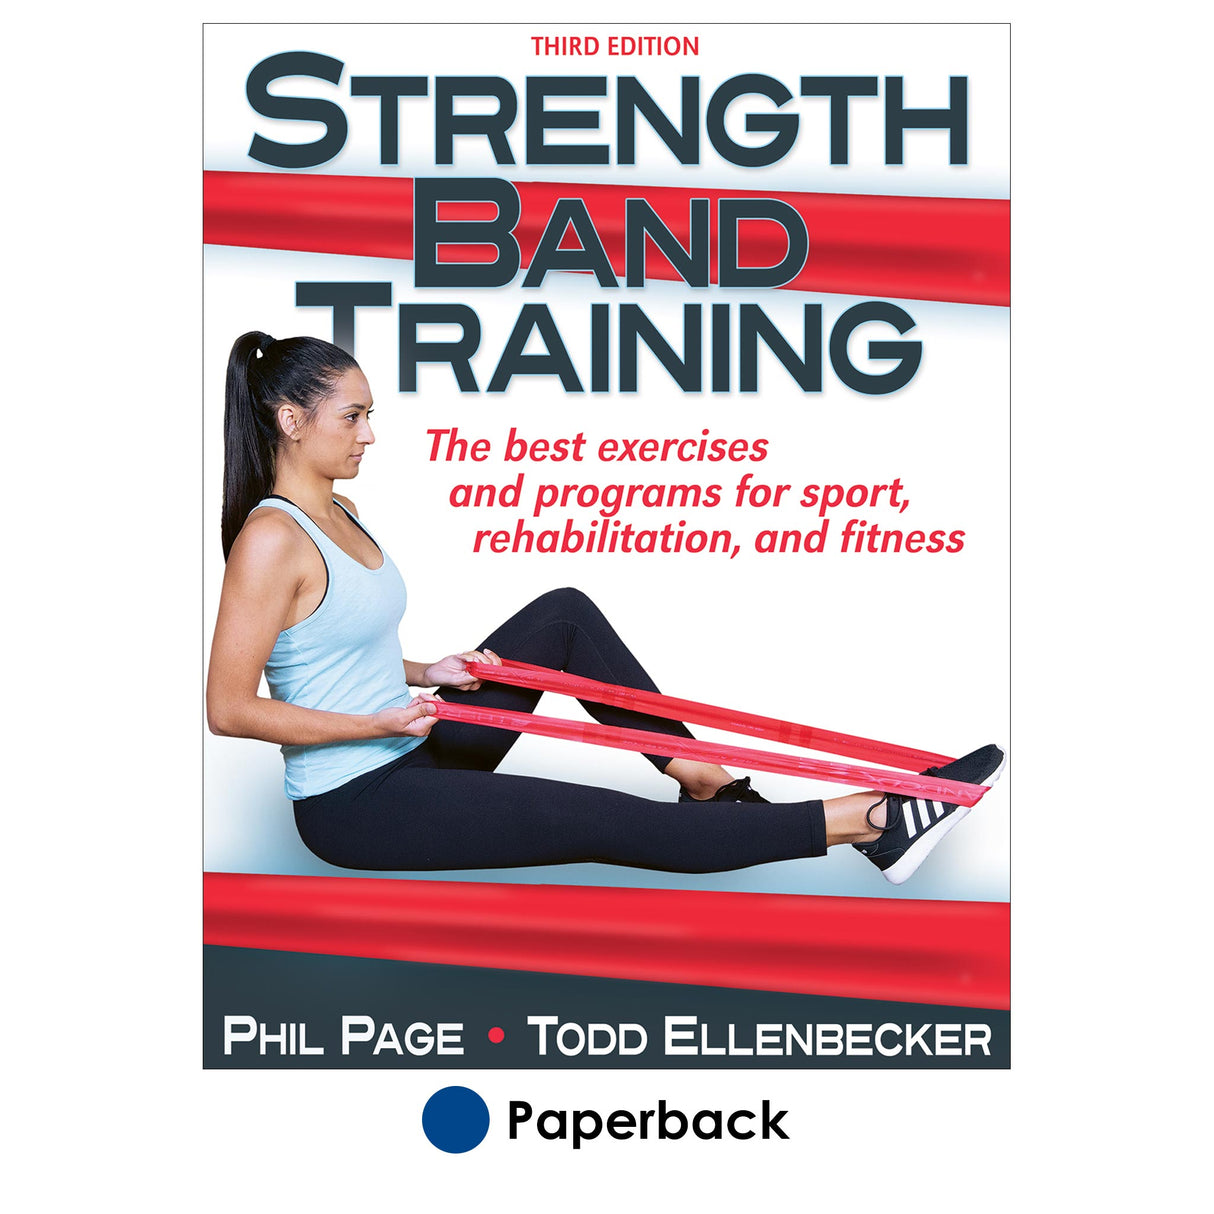 Strength Band Training 3rd Edition